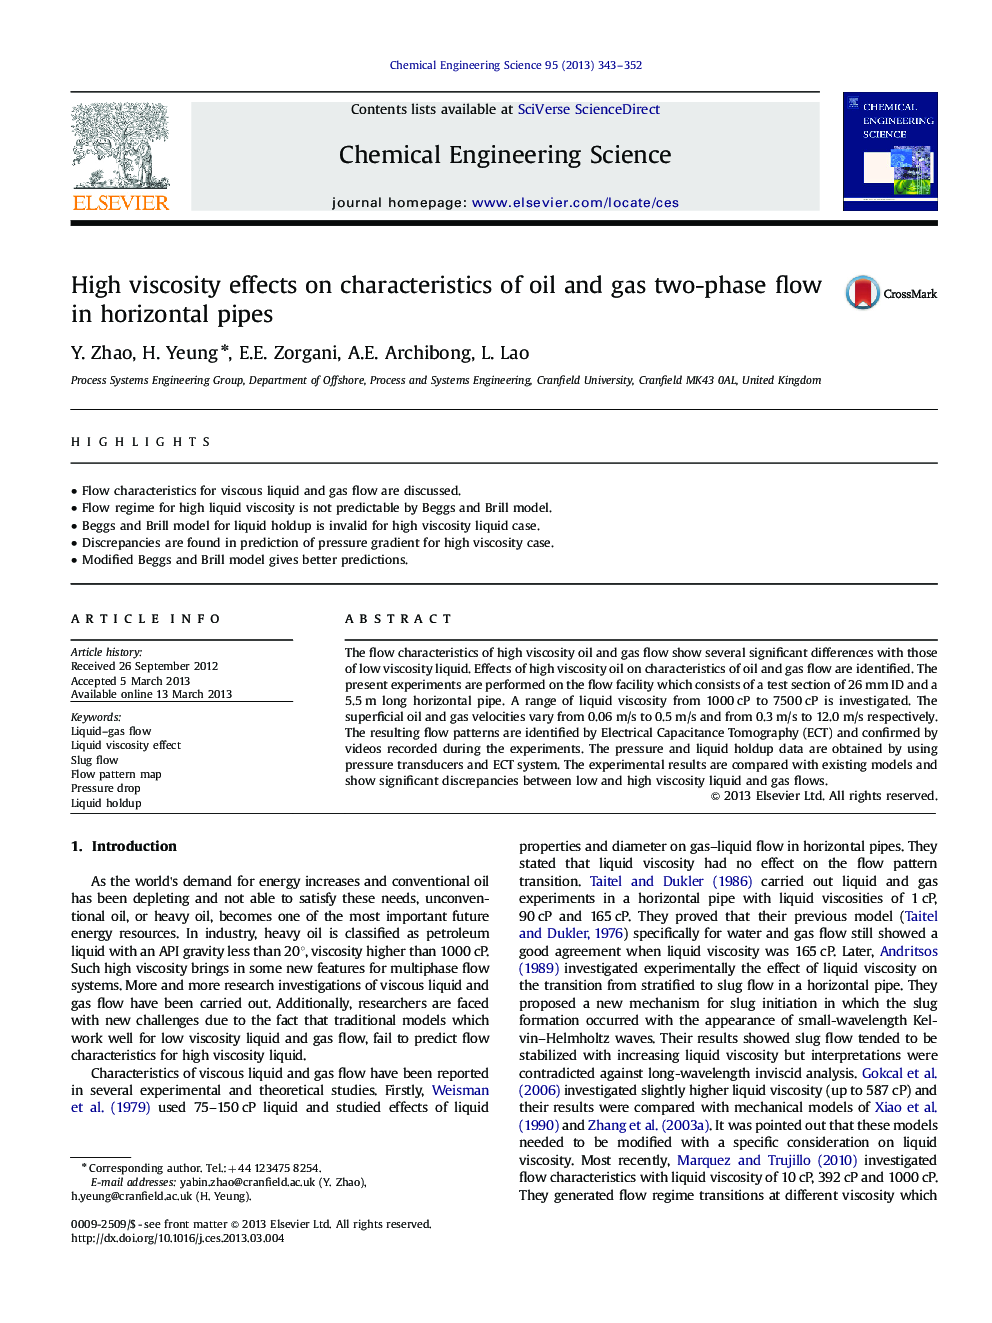 High viscosity effects on characteristics of oil and gas two-phase flow in horizontal pipes